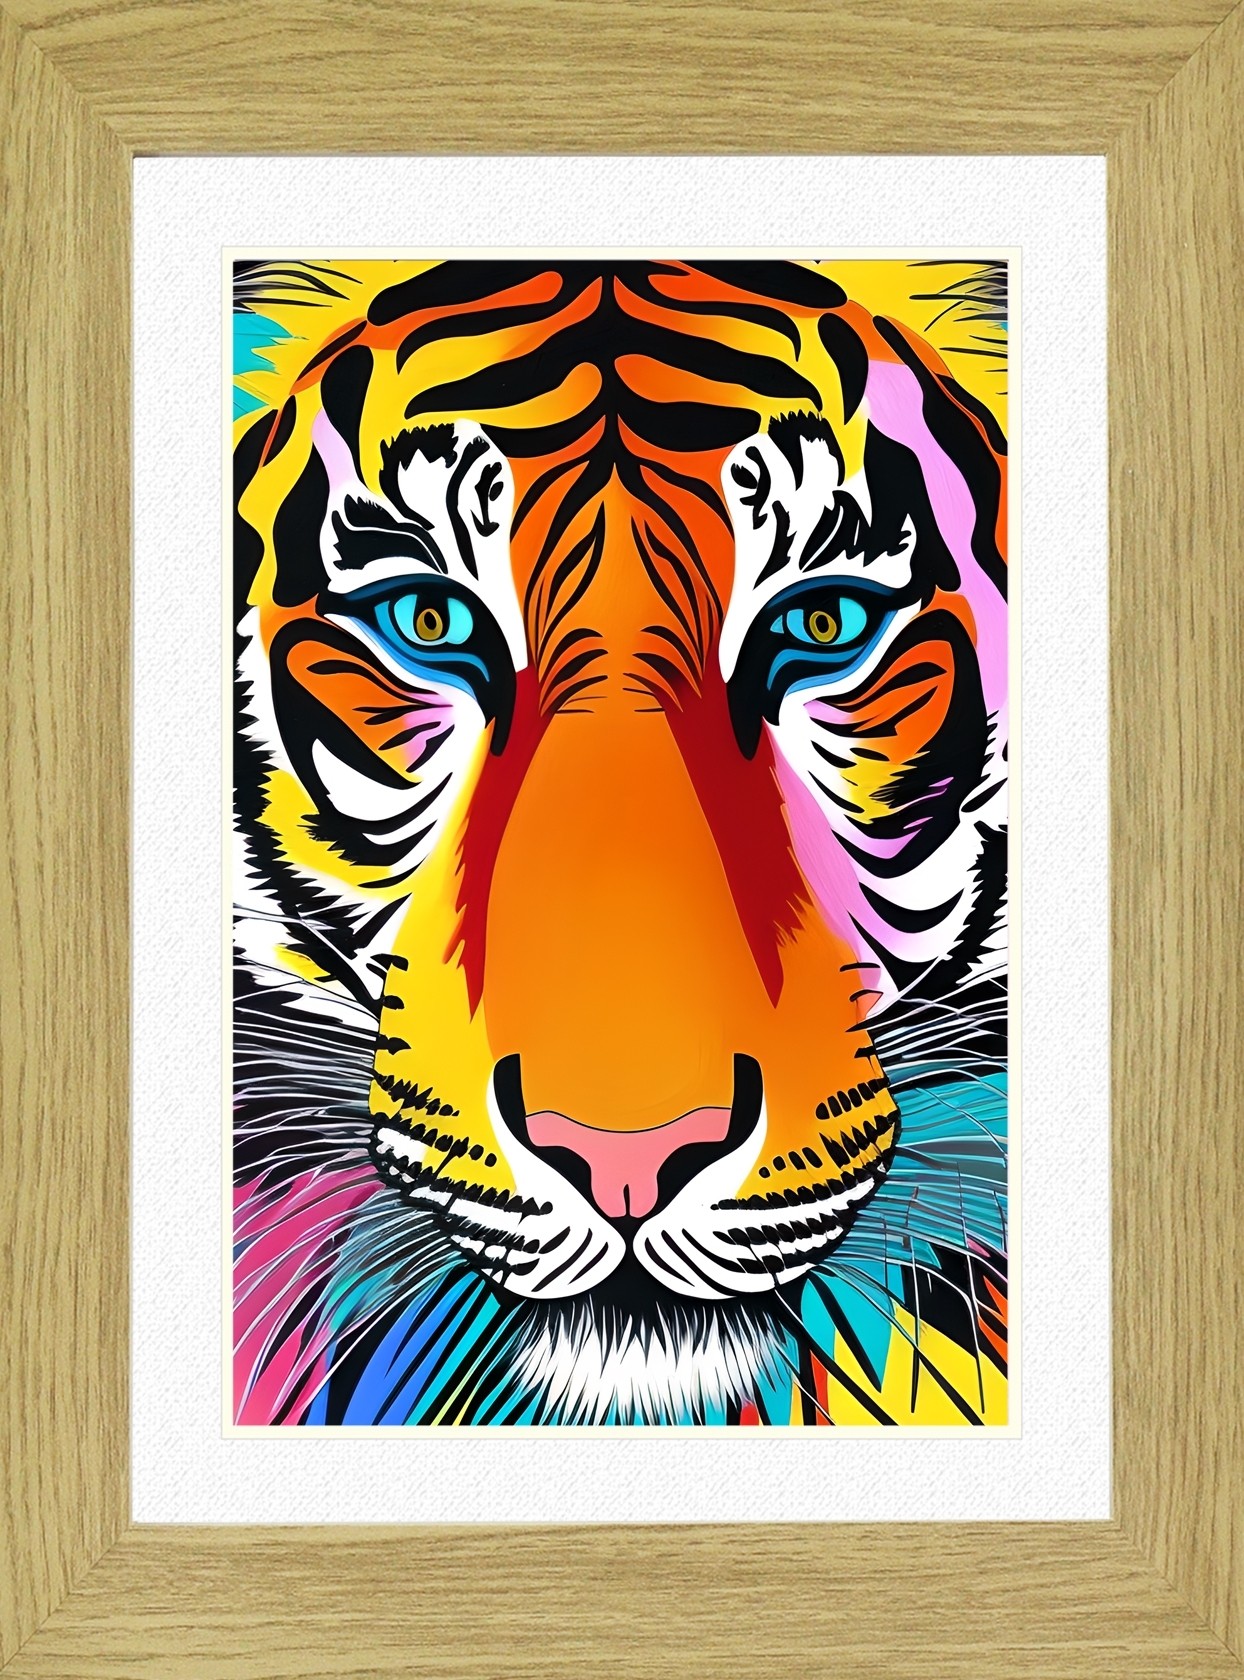 Tiger Animal Picture Framed Colourful Abstract Art (A3 Light Oak Frame)